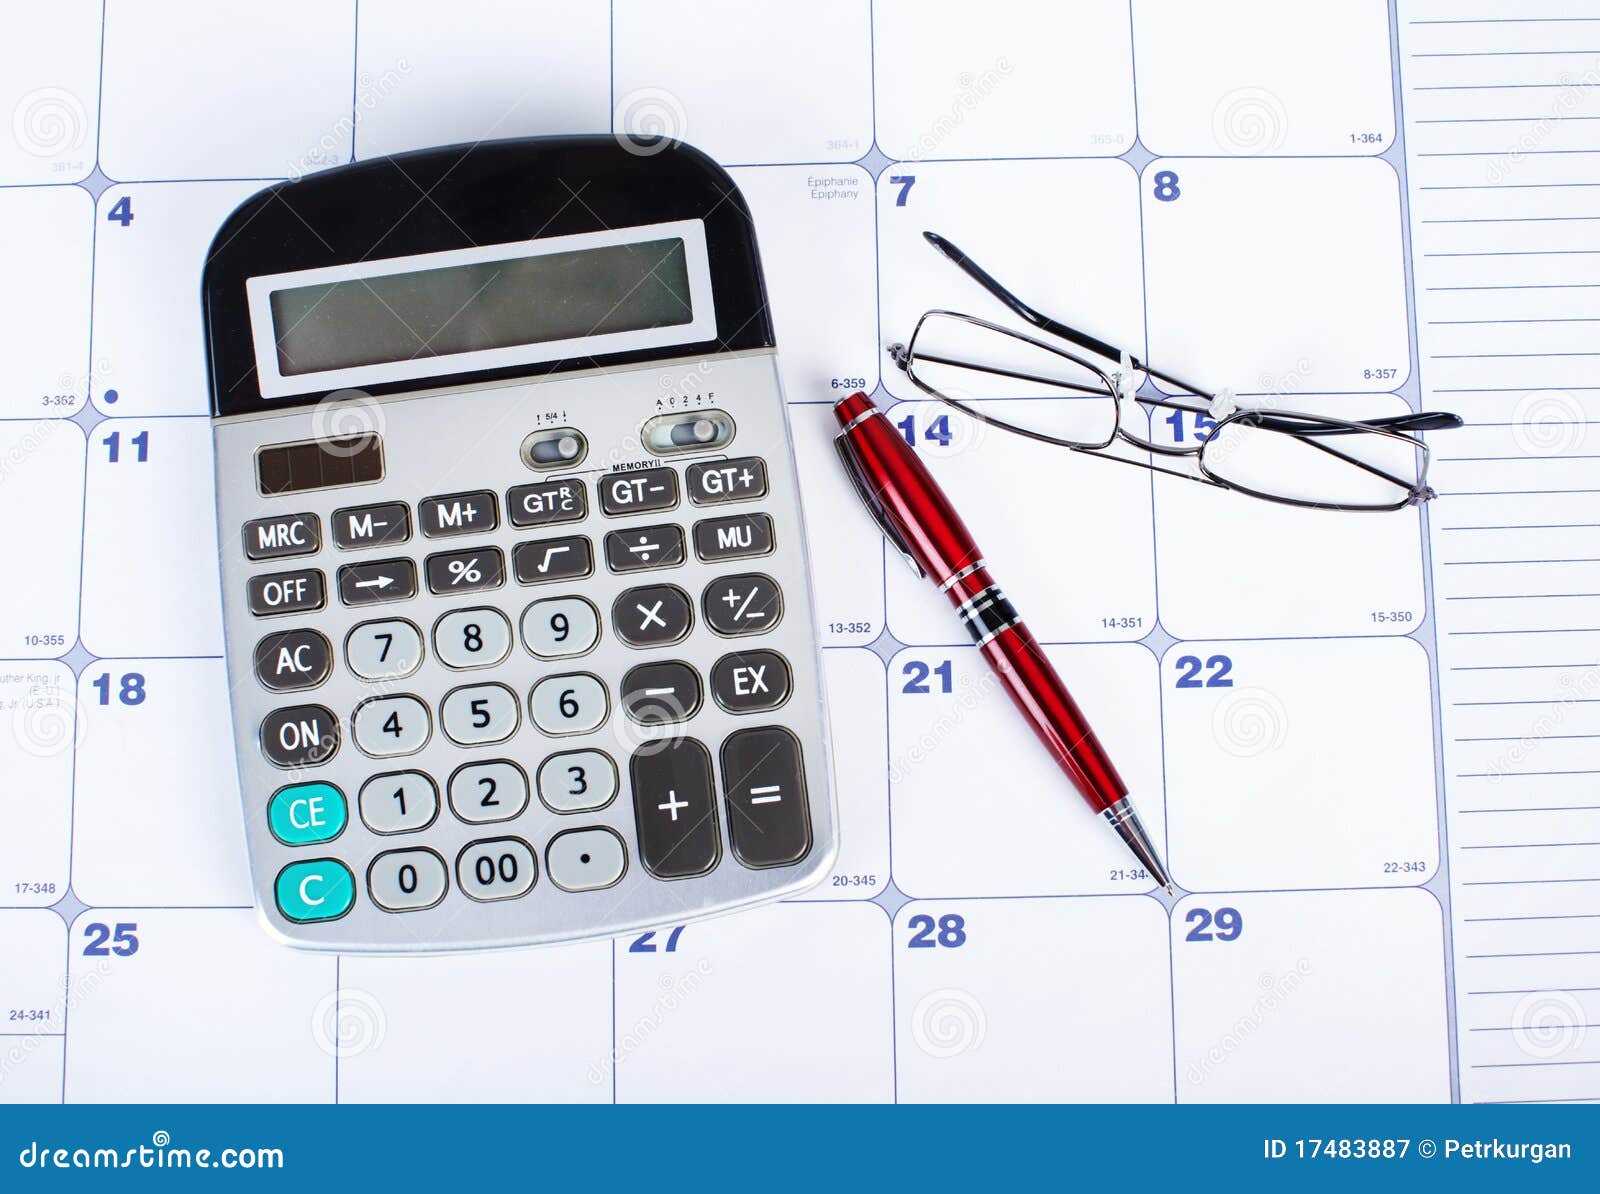 The Calculator And Calendar Stock Image Image of business, portable